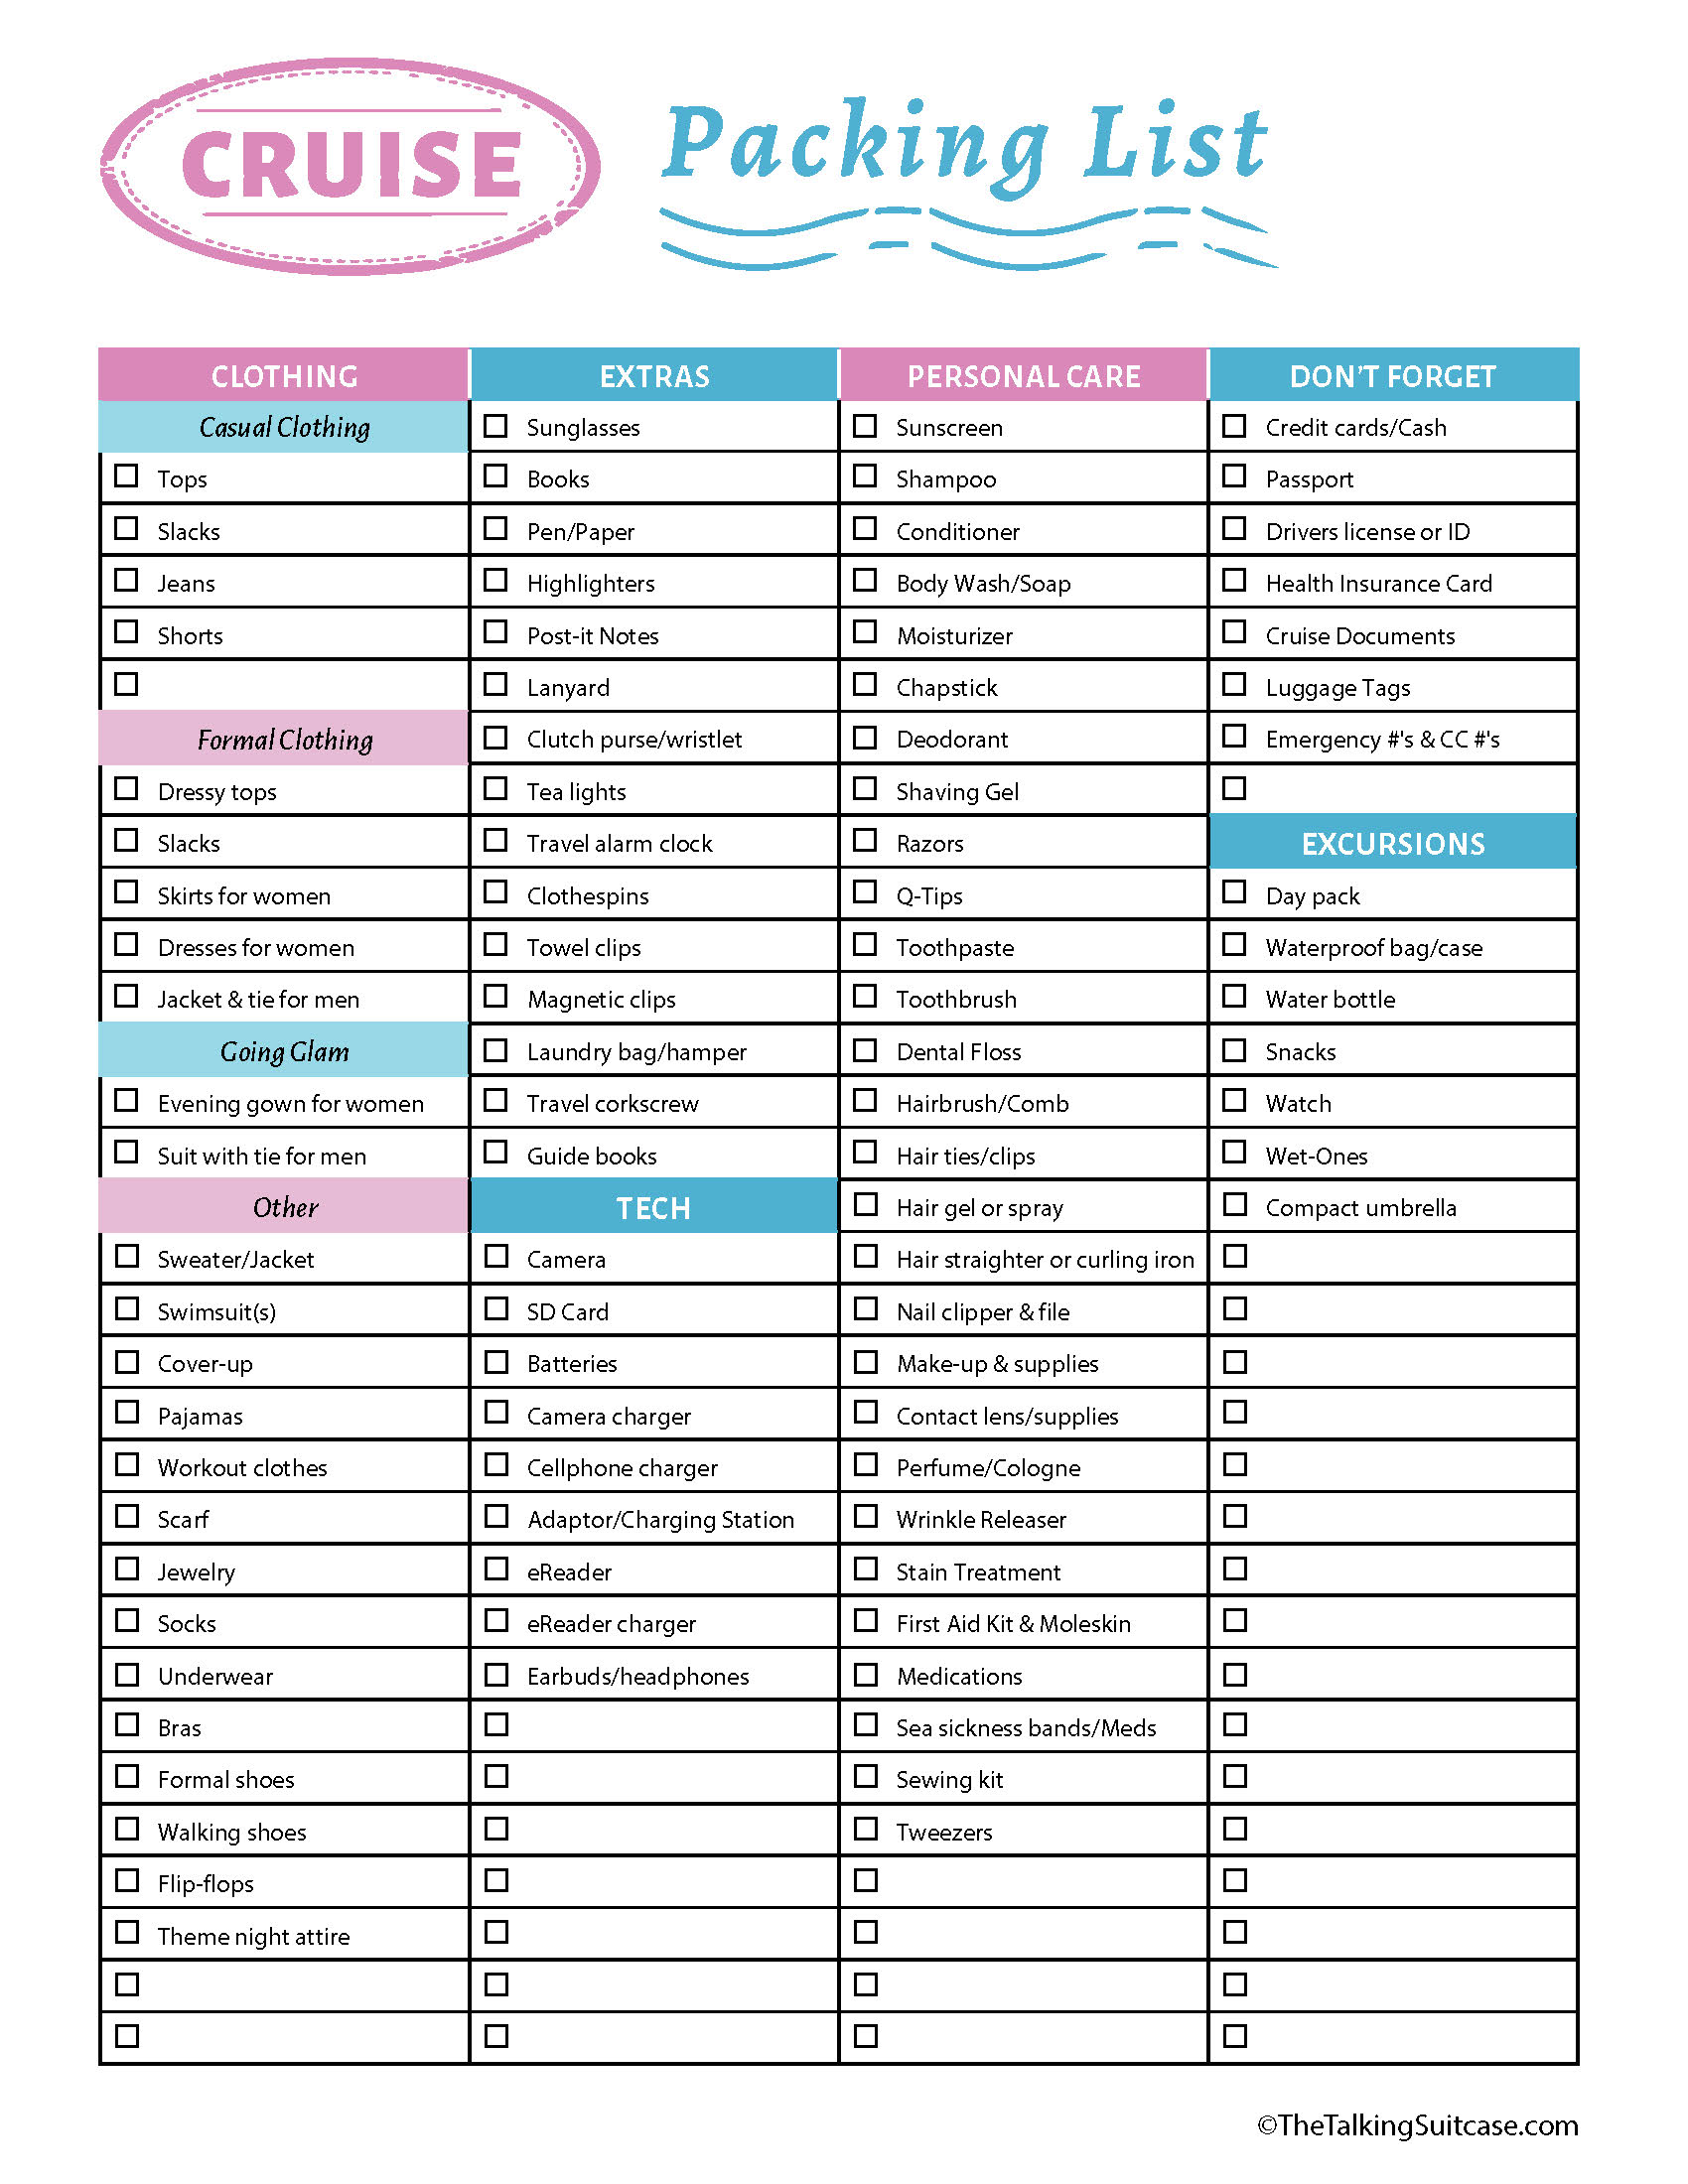 20 Things To Pack For A Cruise Plus Printable Packing List For Cruise